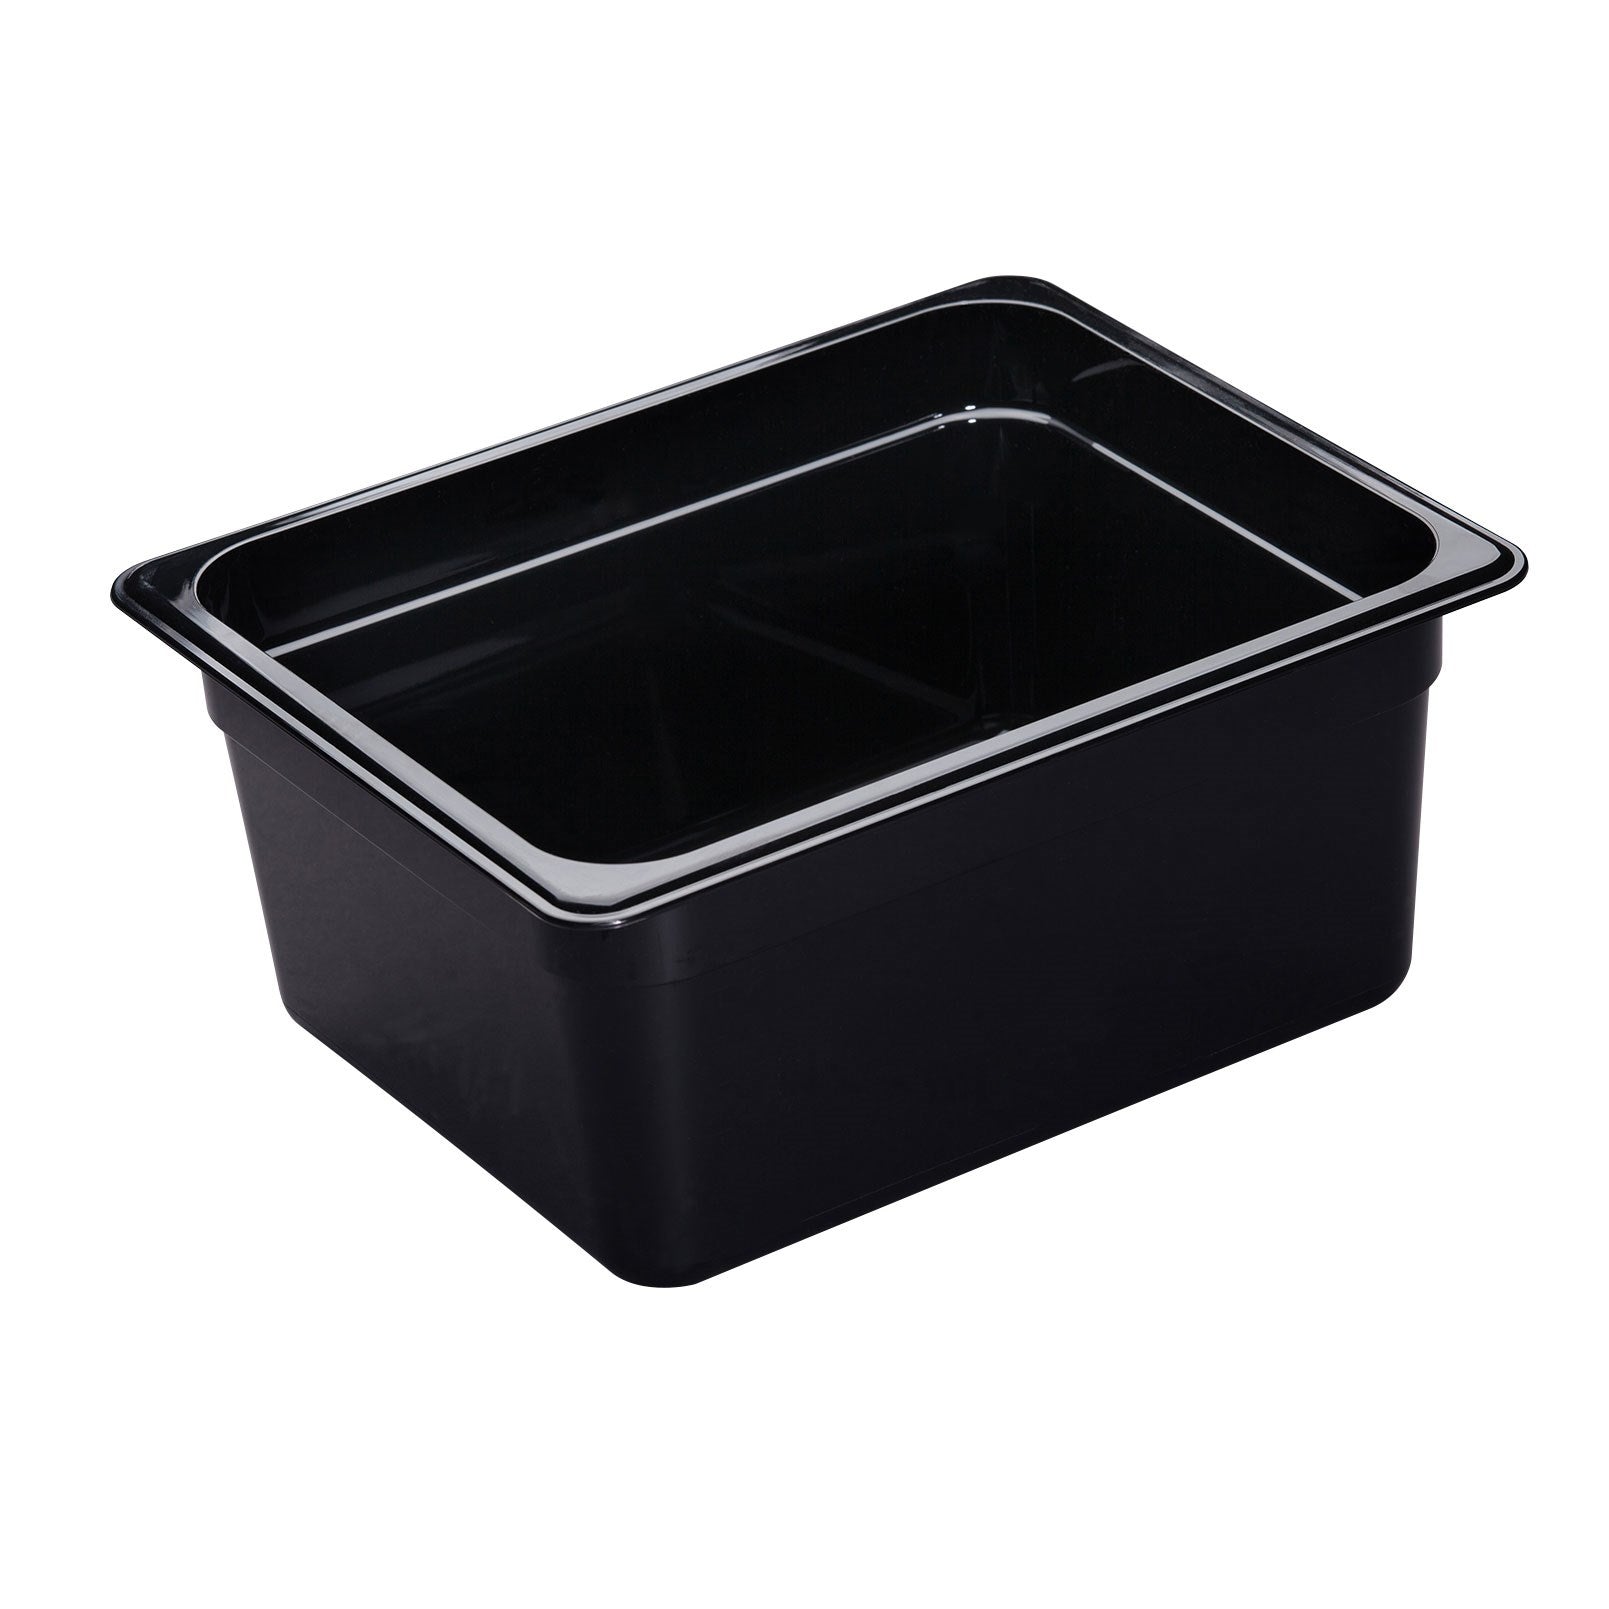 Rubbermaid Commercial Products Cold Food Insert Pan for  Restaurants/Kitchens/Cafeterias, 1/2 Size, 6 Inches Deep, Clear  (FG125P00CLR)